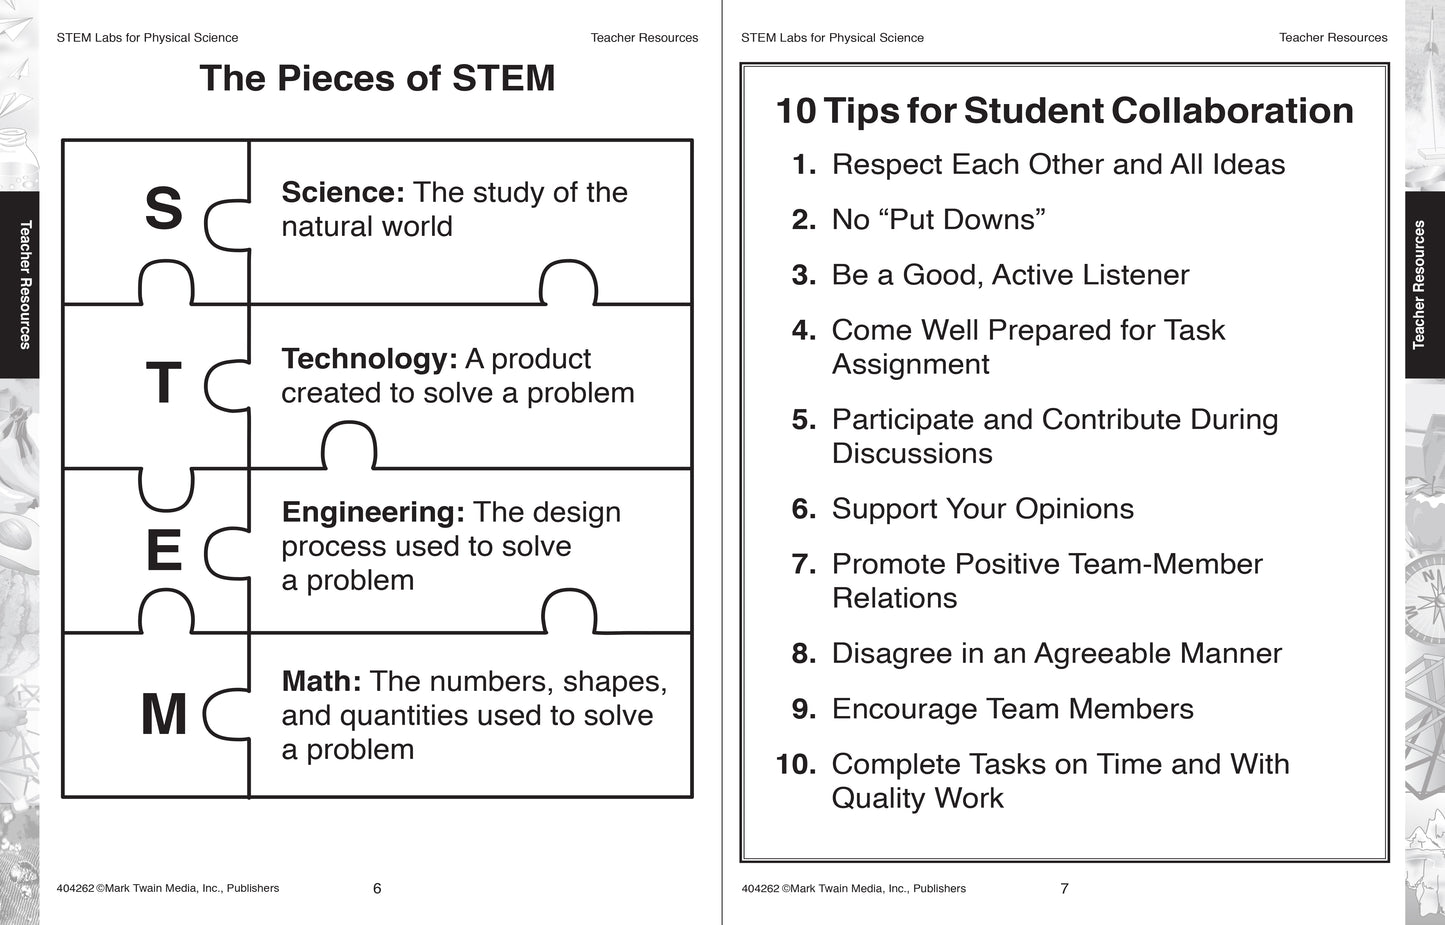 STEM Labs for Physical Science, Book, Carson Dellosa, Activities, Book, Bright Education Australia, Physical Science, Science, STEM, Teacher Resources, Bright Education Australia, 